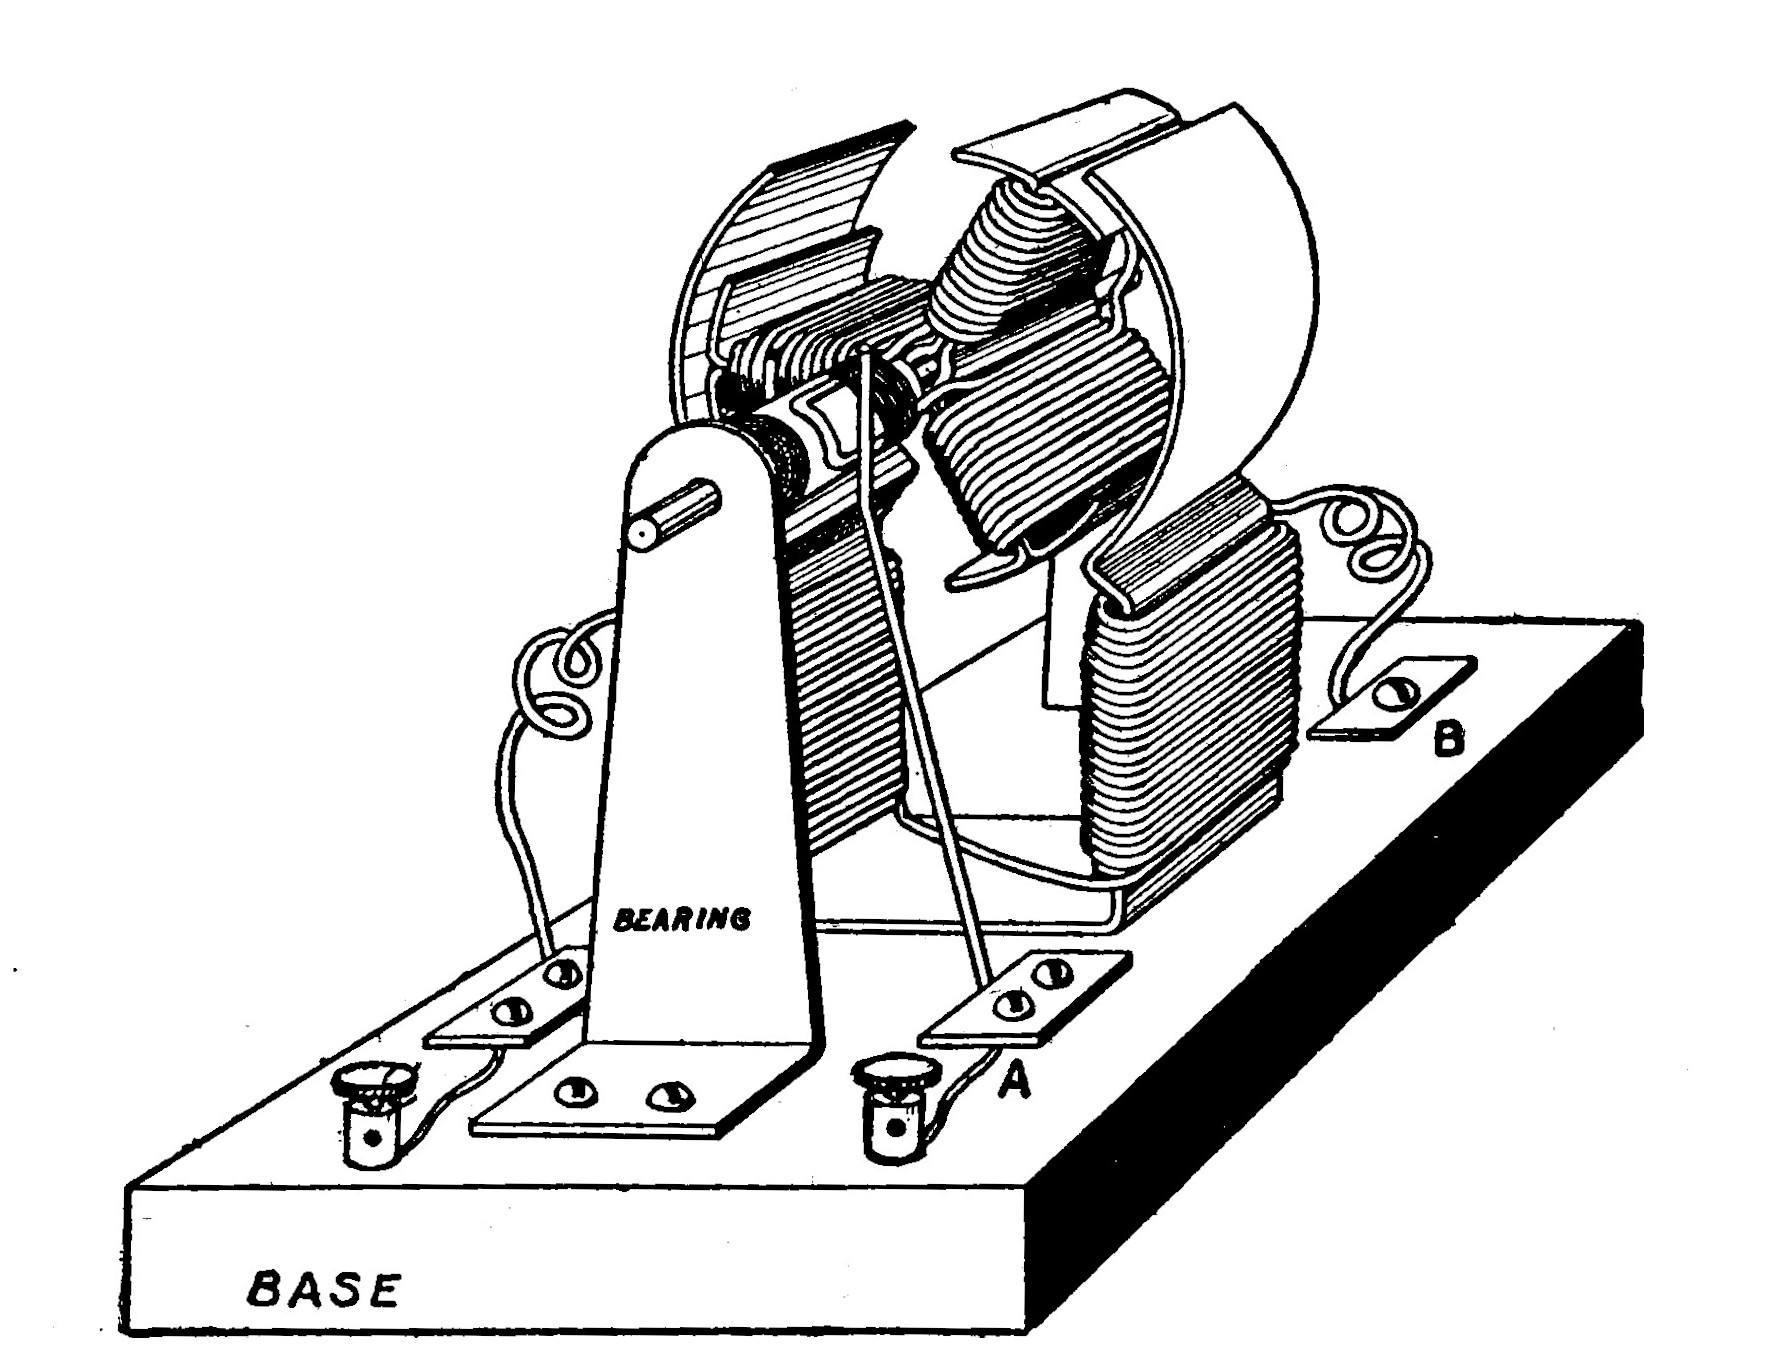 FIG. 25.—The Simplex "Overtype" Motor.